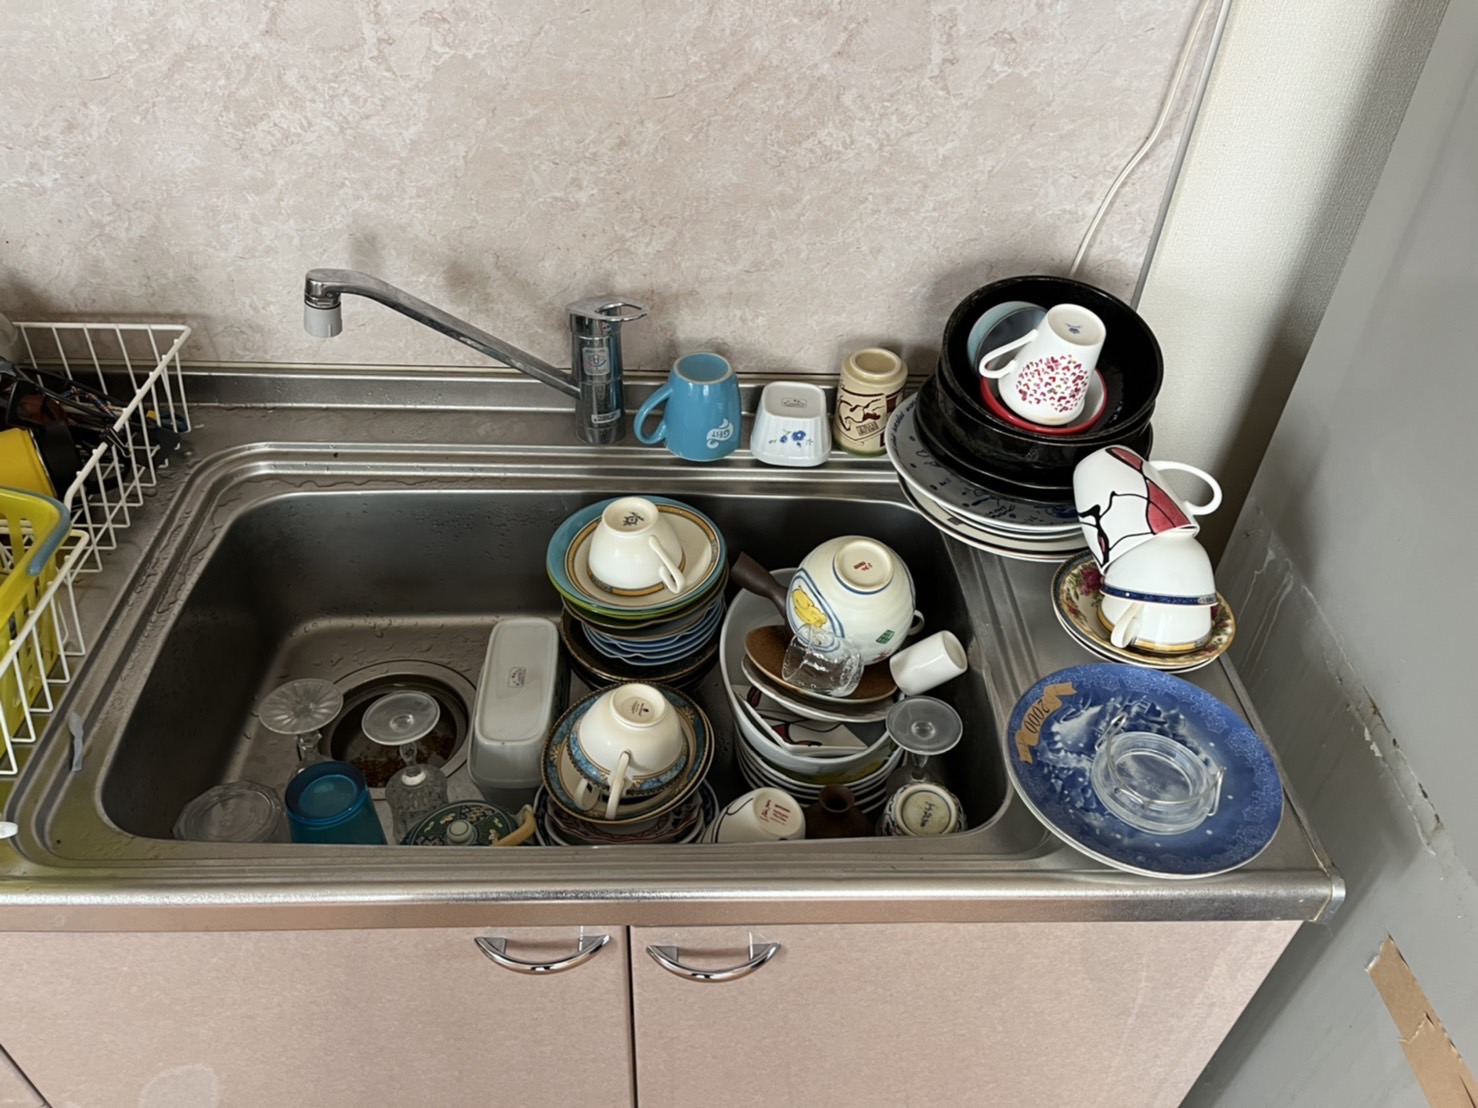 tidying up the kitchen-dish disposal